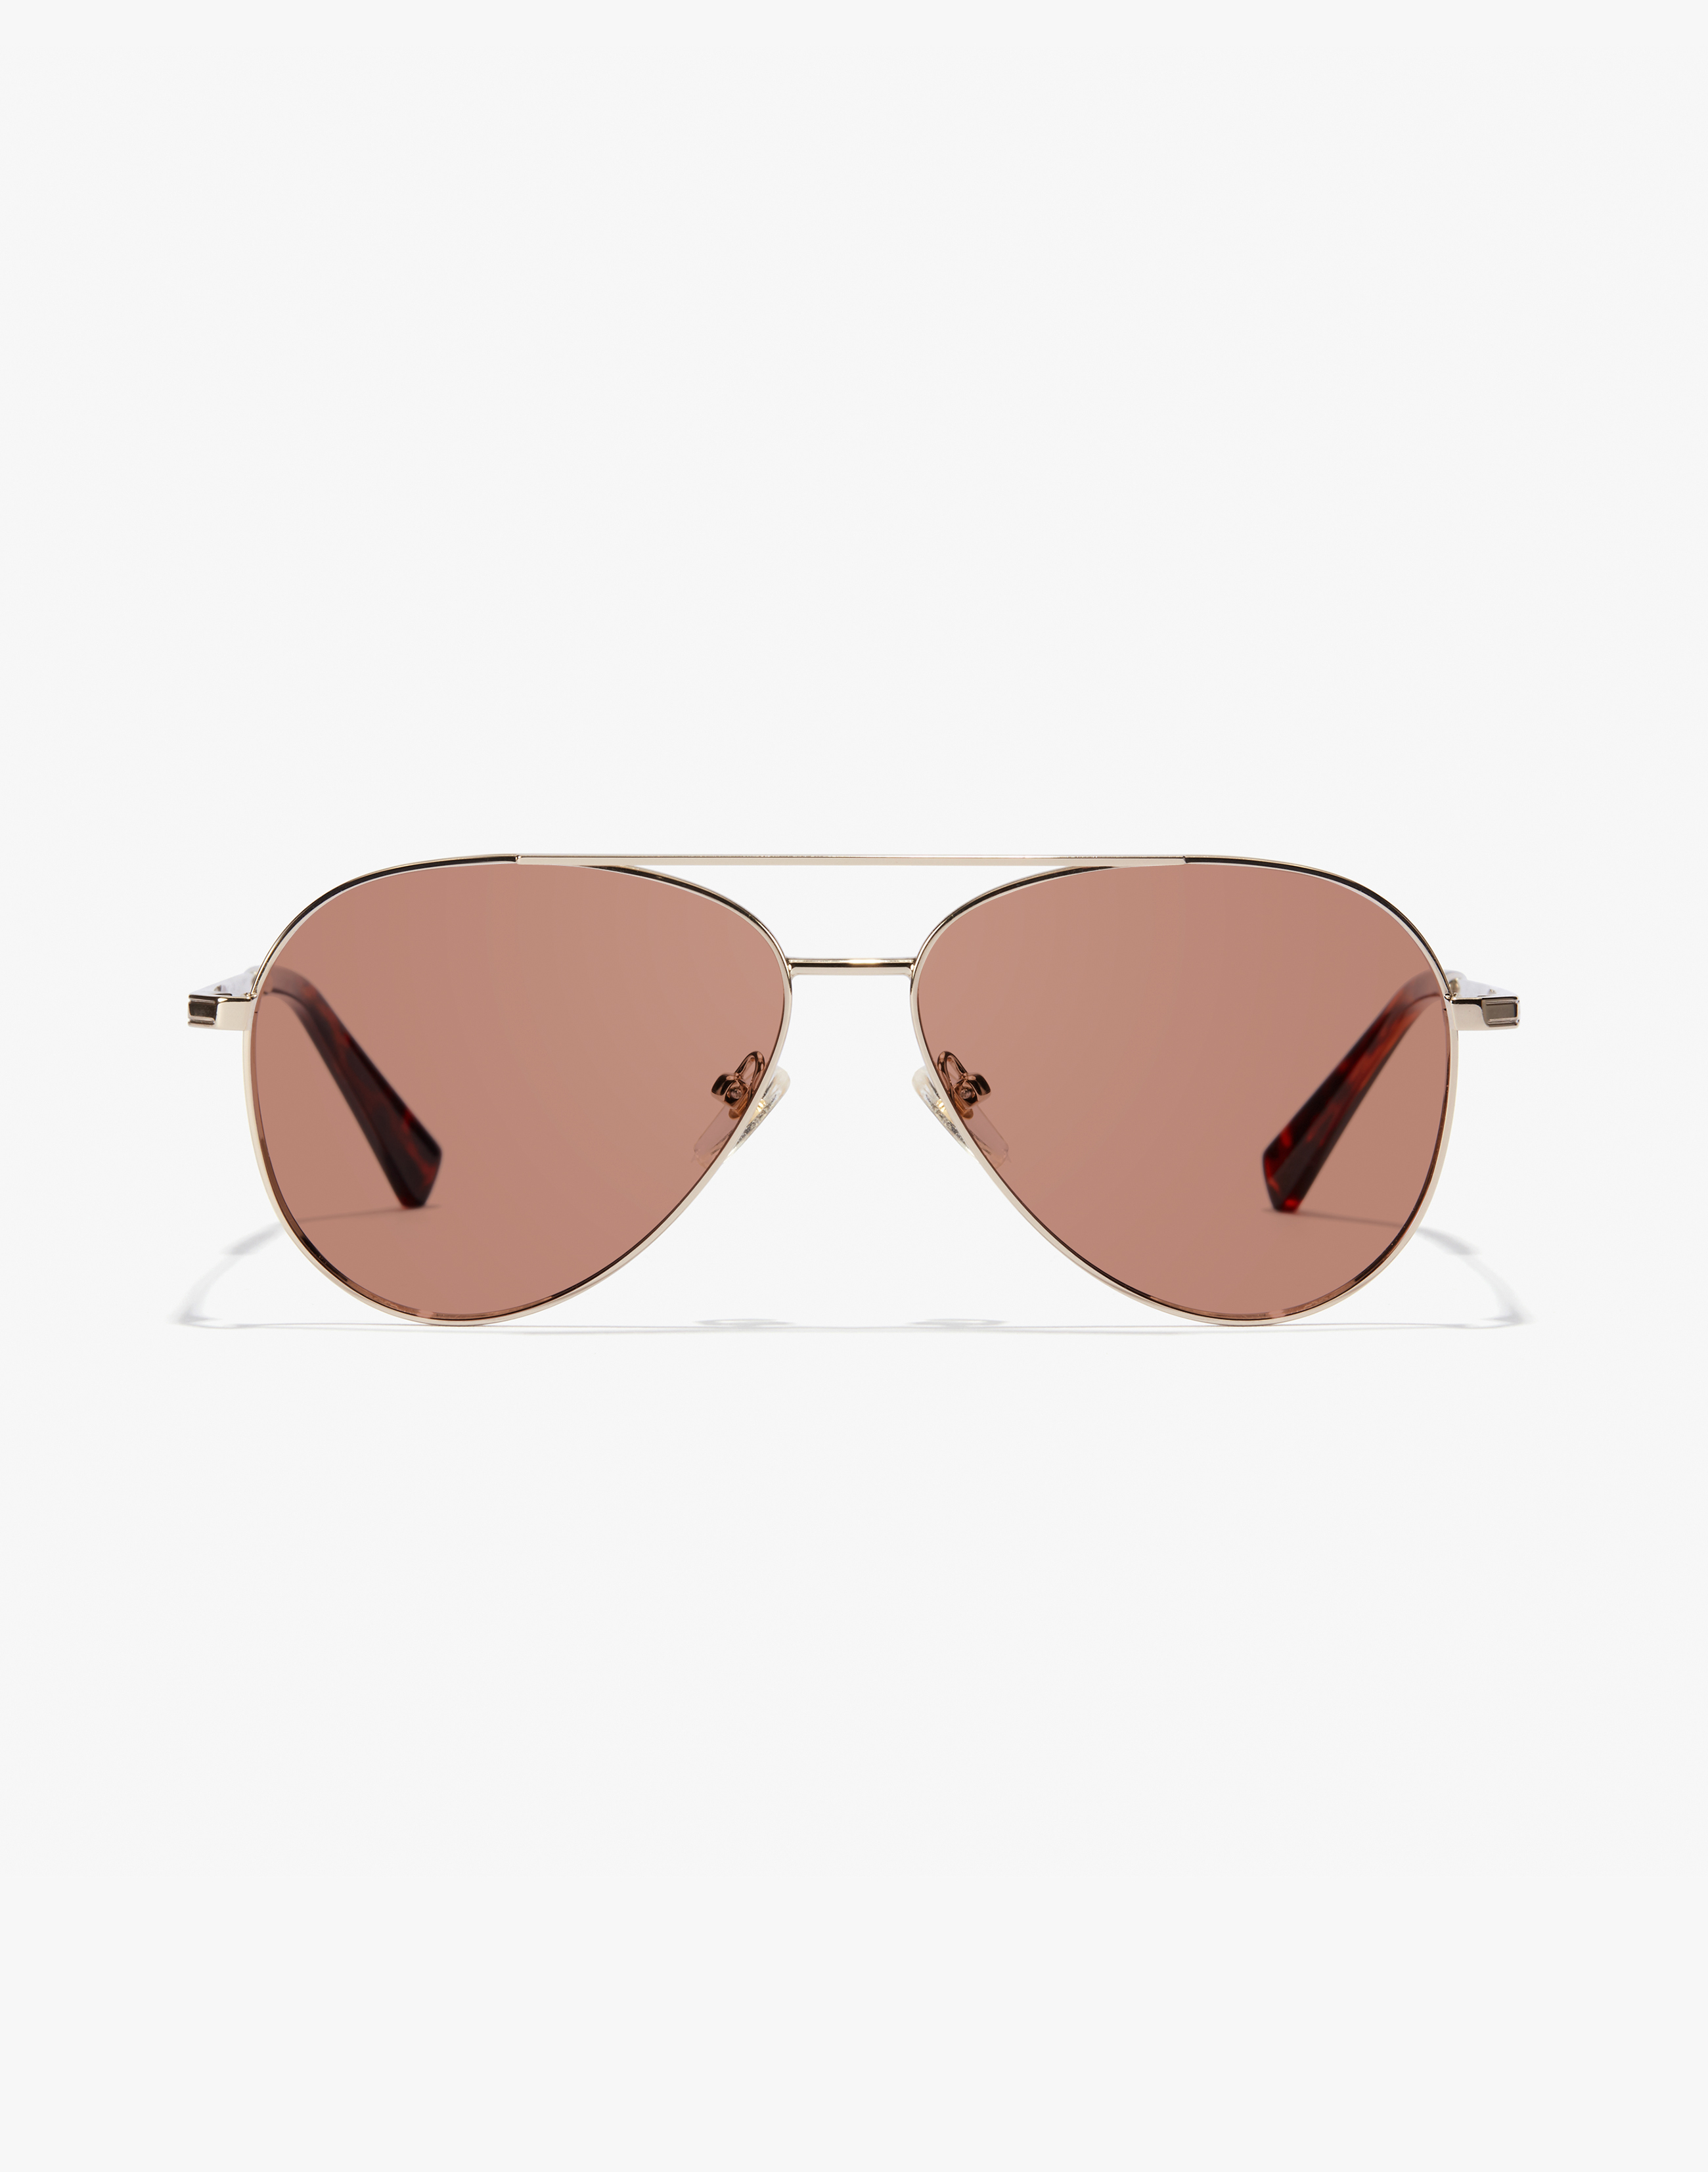 /on/demandware.static/-/Sites-Master-Catalog-Graduadas/default/dw87bfdd3c/images/modal_colored/hawkers_eyewear-gold-provence-rx-HPR03RX-brown.jpg